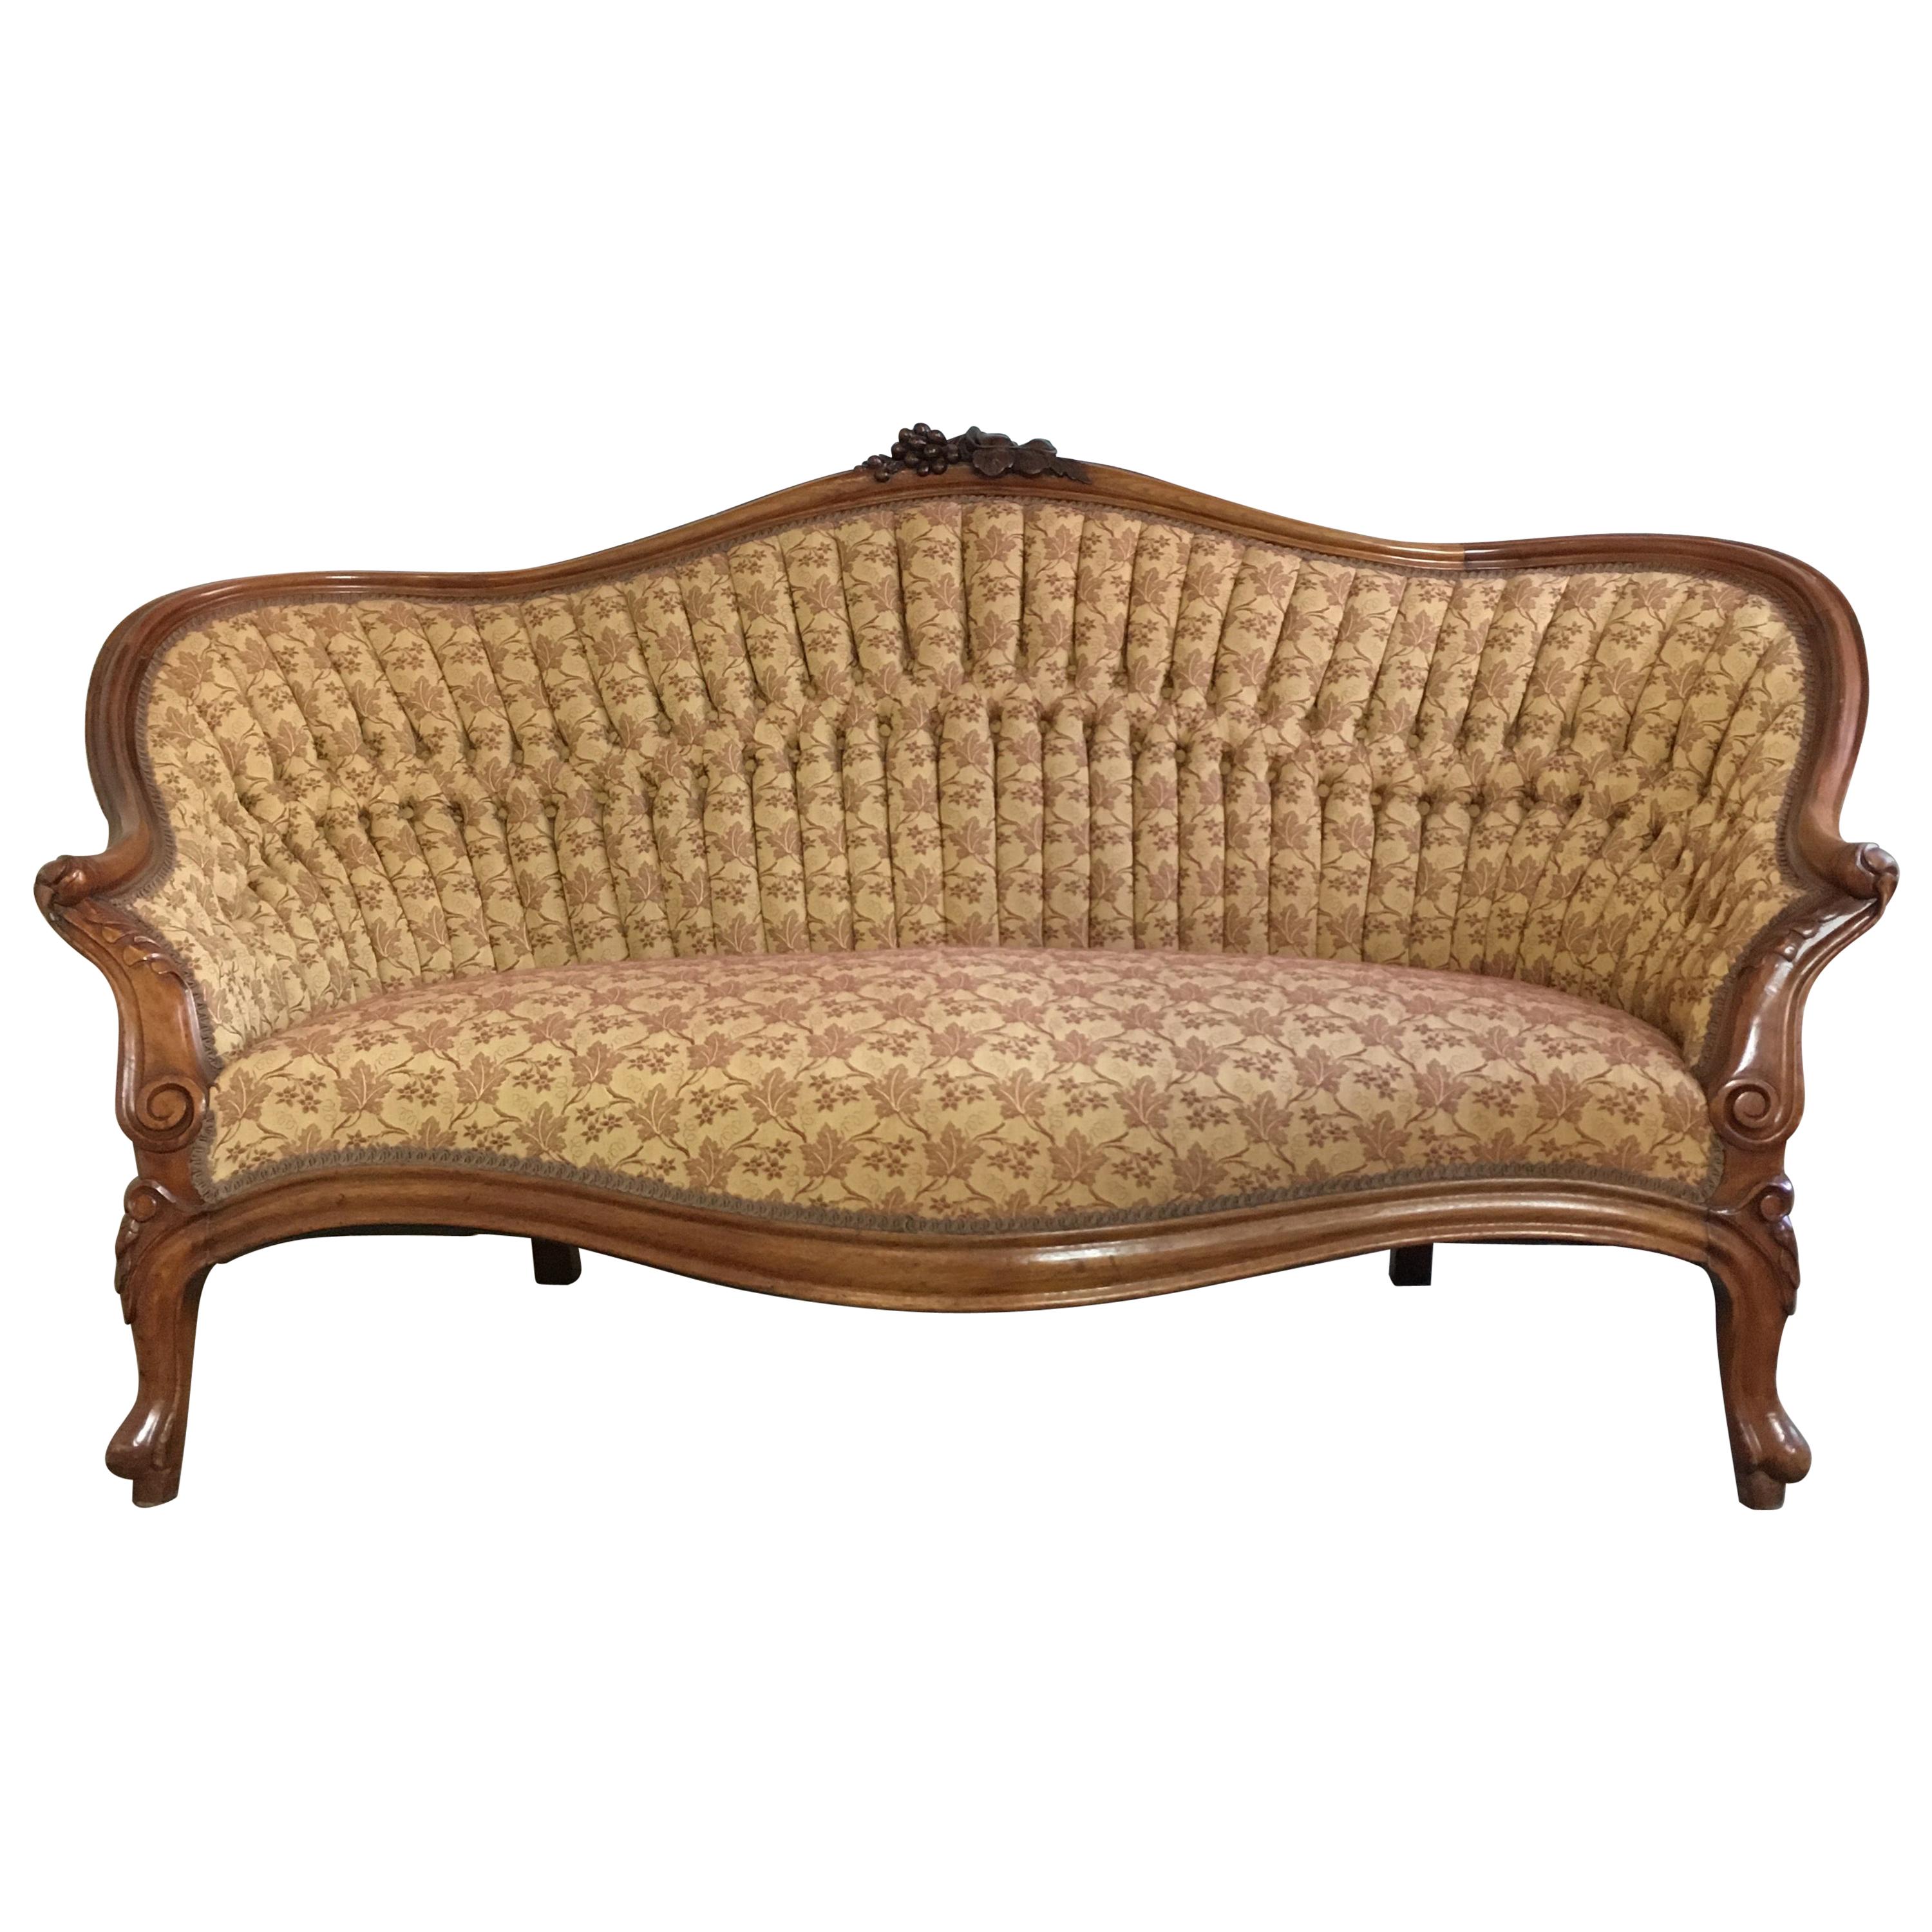 Antique French Walnut Settee, circa 1890s